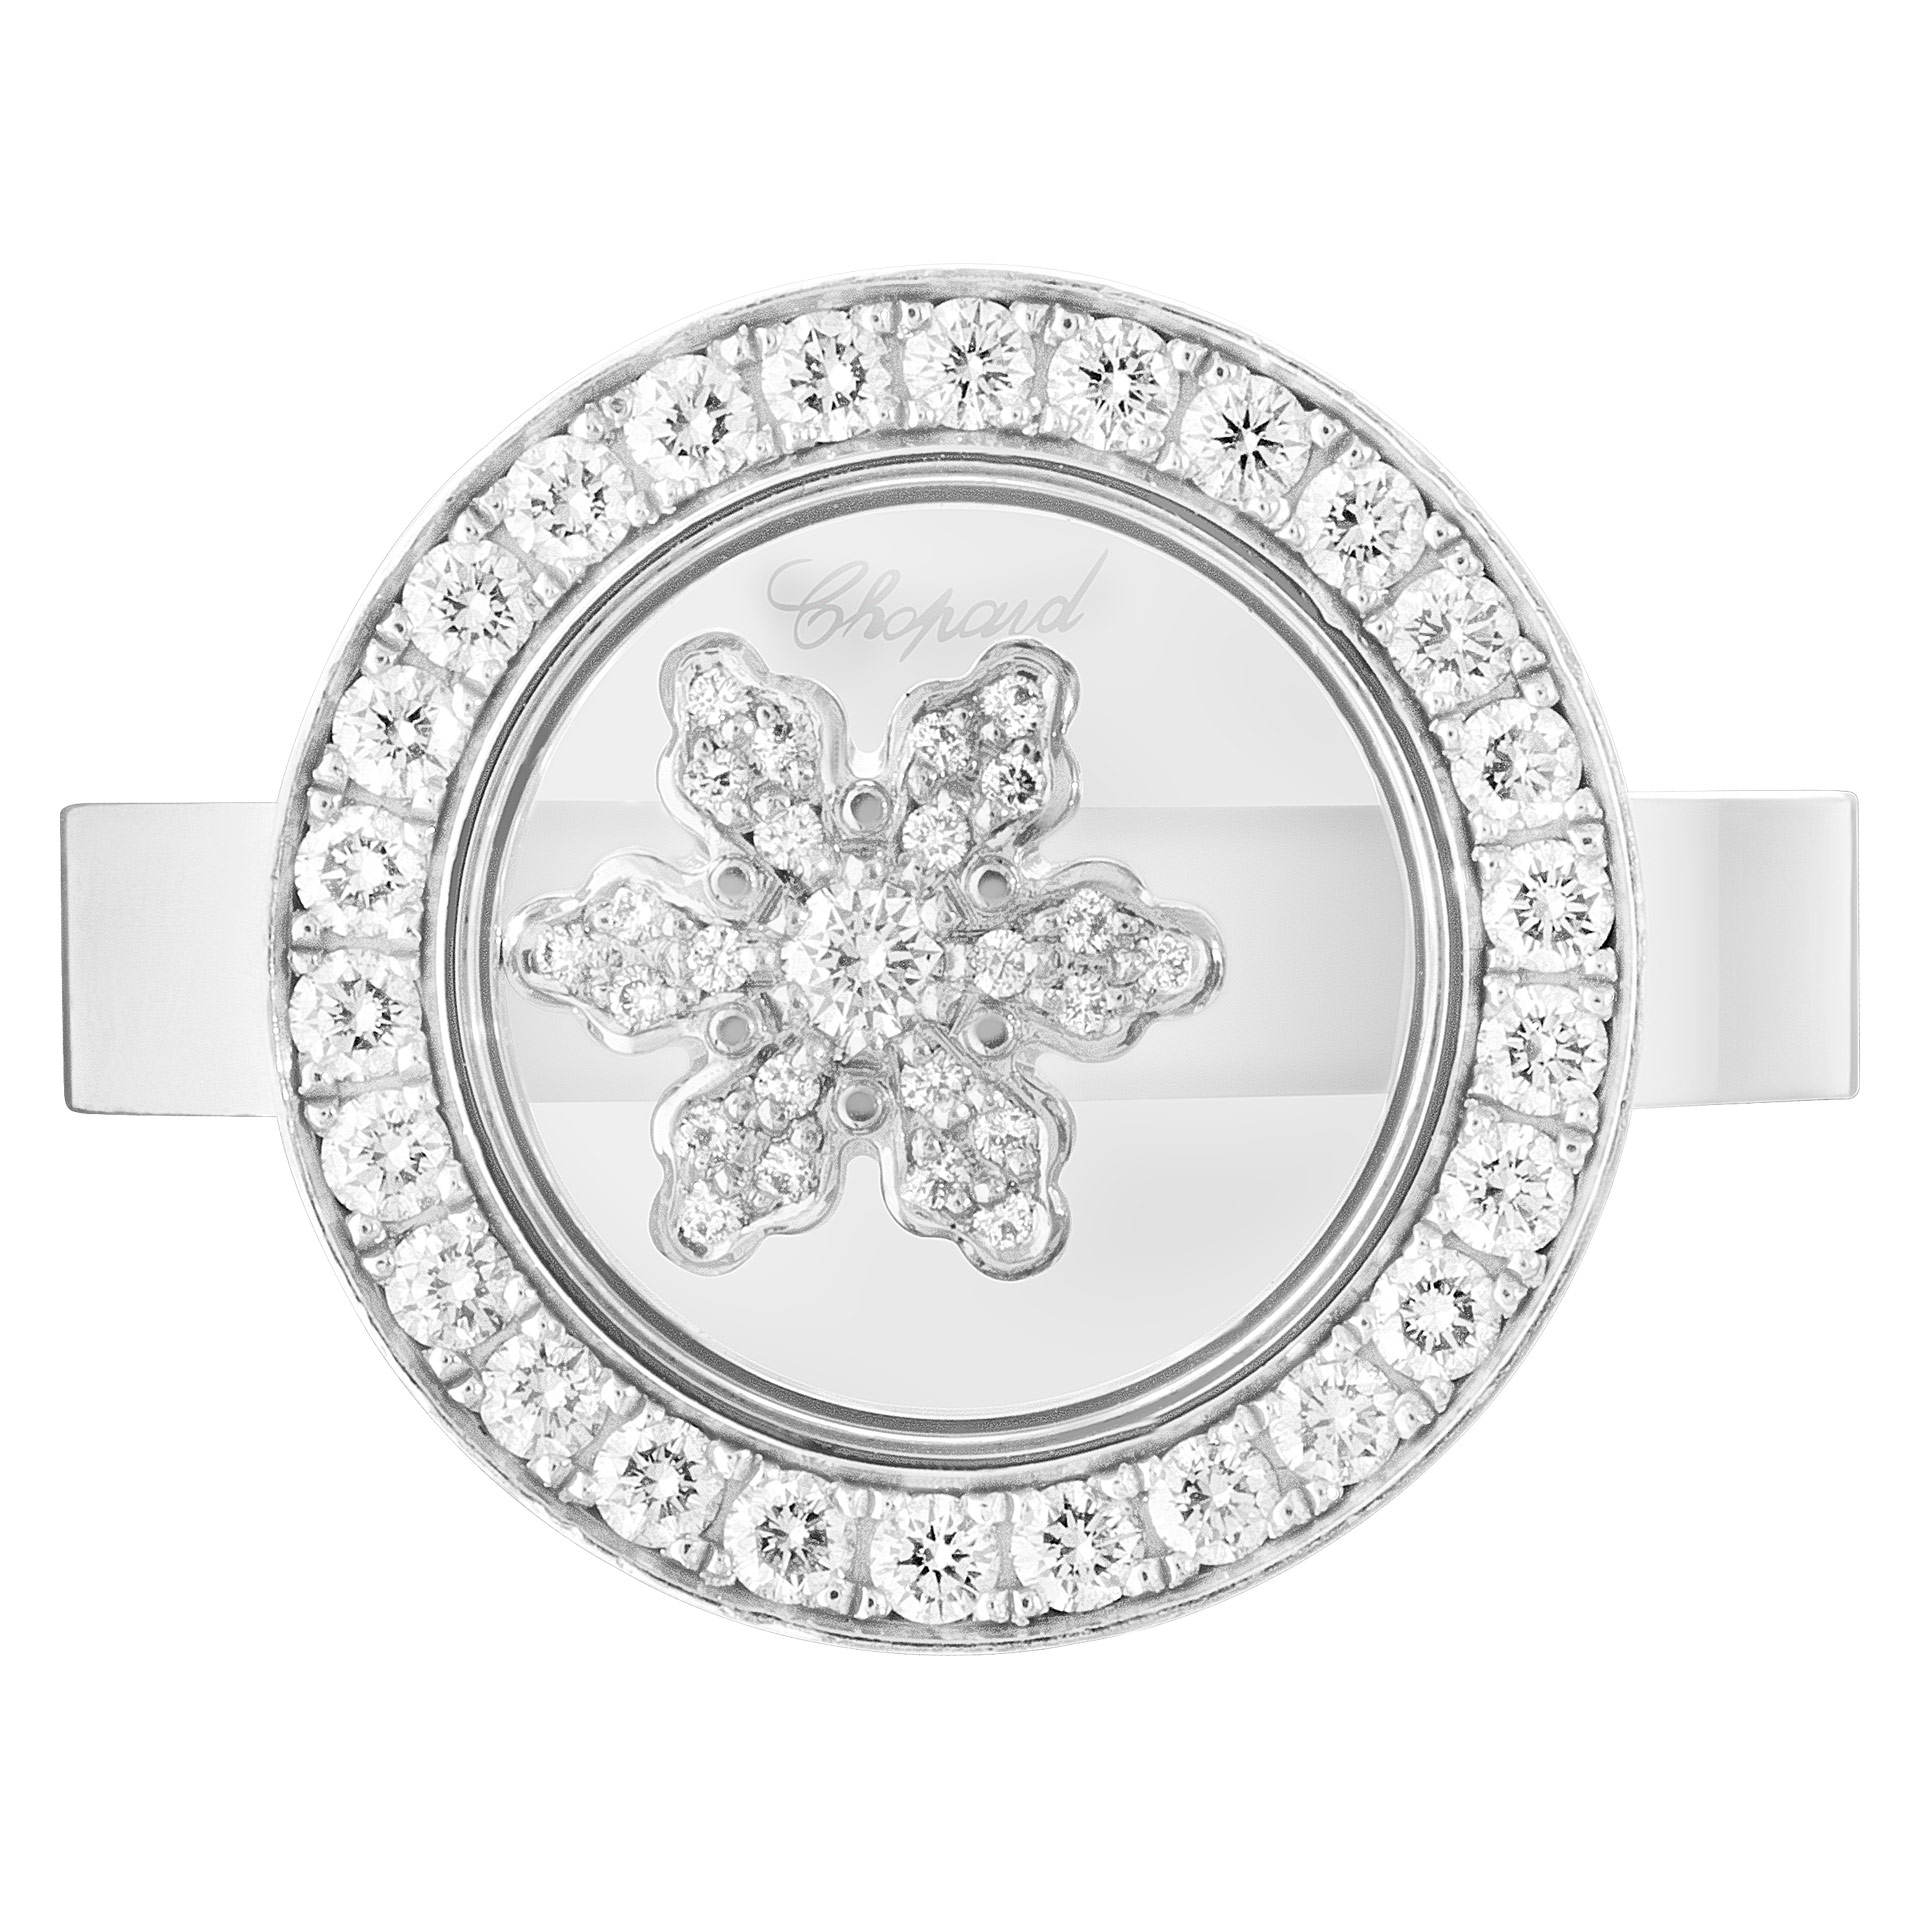 Chopard Snowflake ring in 18k white gold. 0.56 cts in diamonds. Size 7